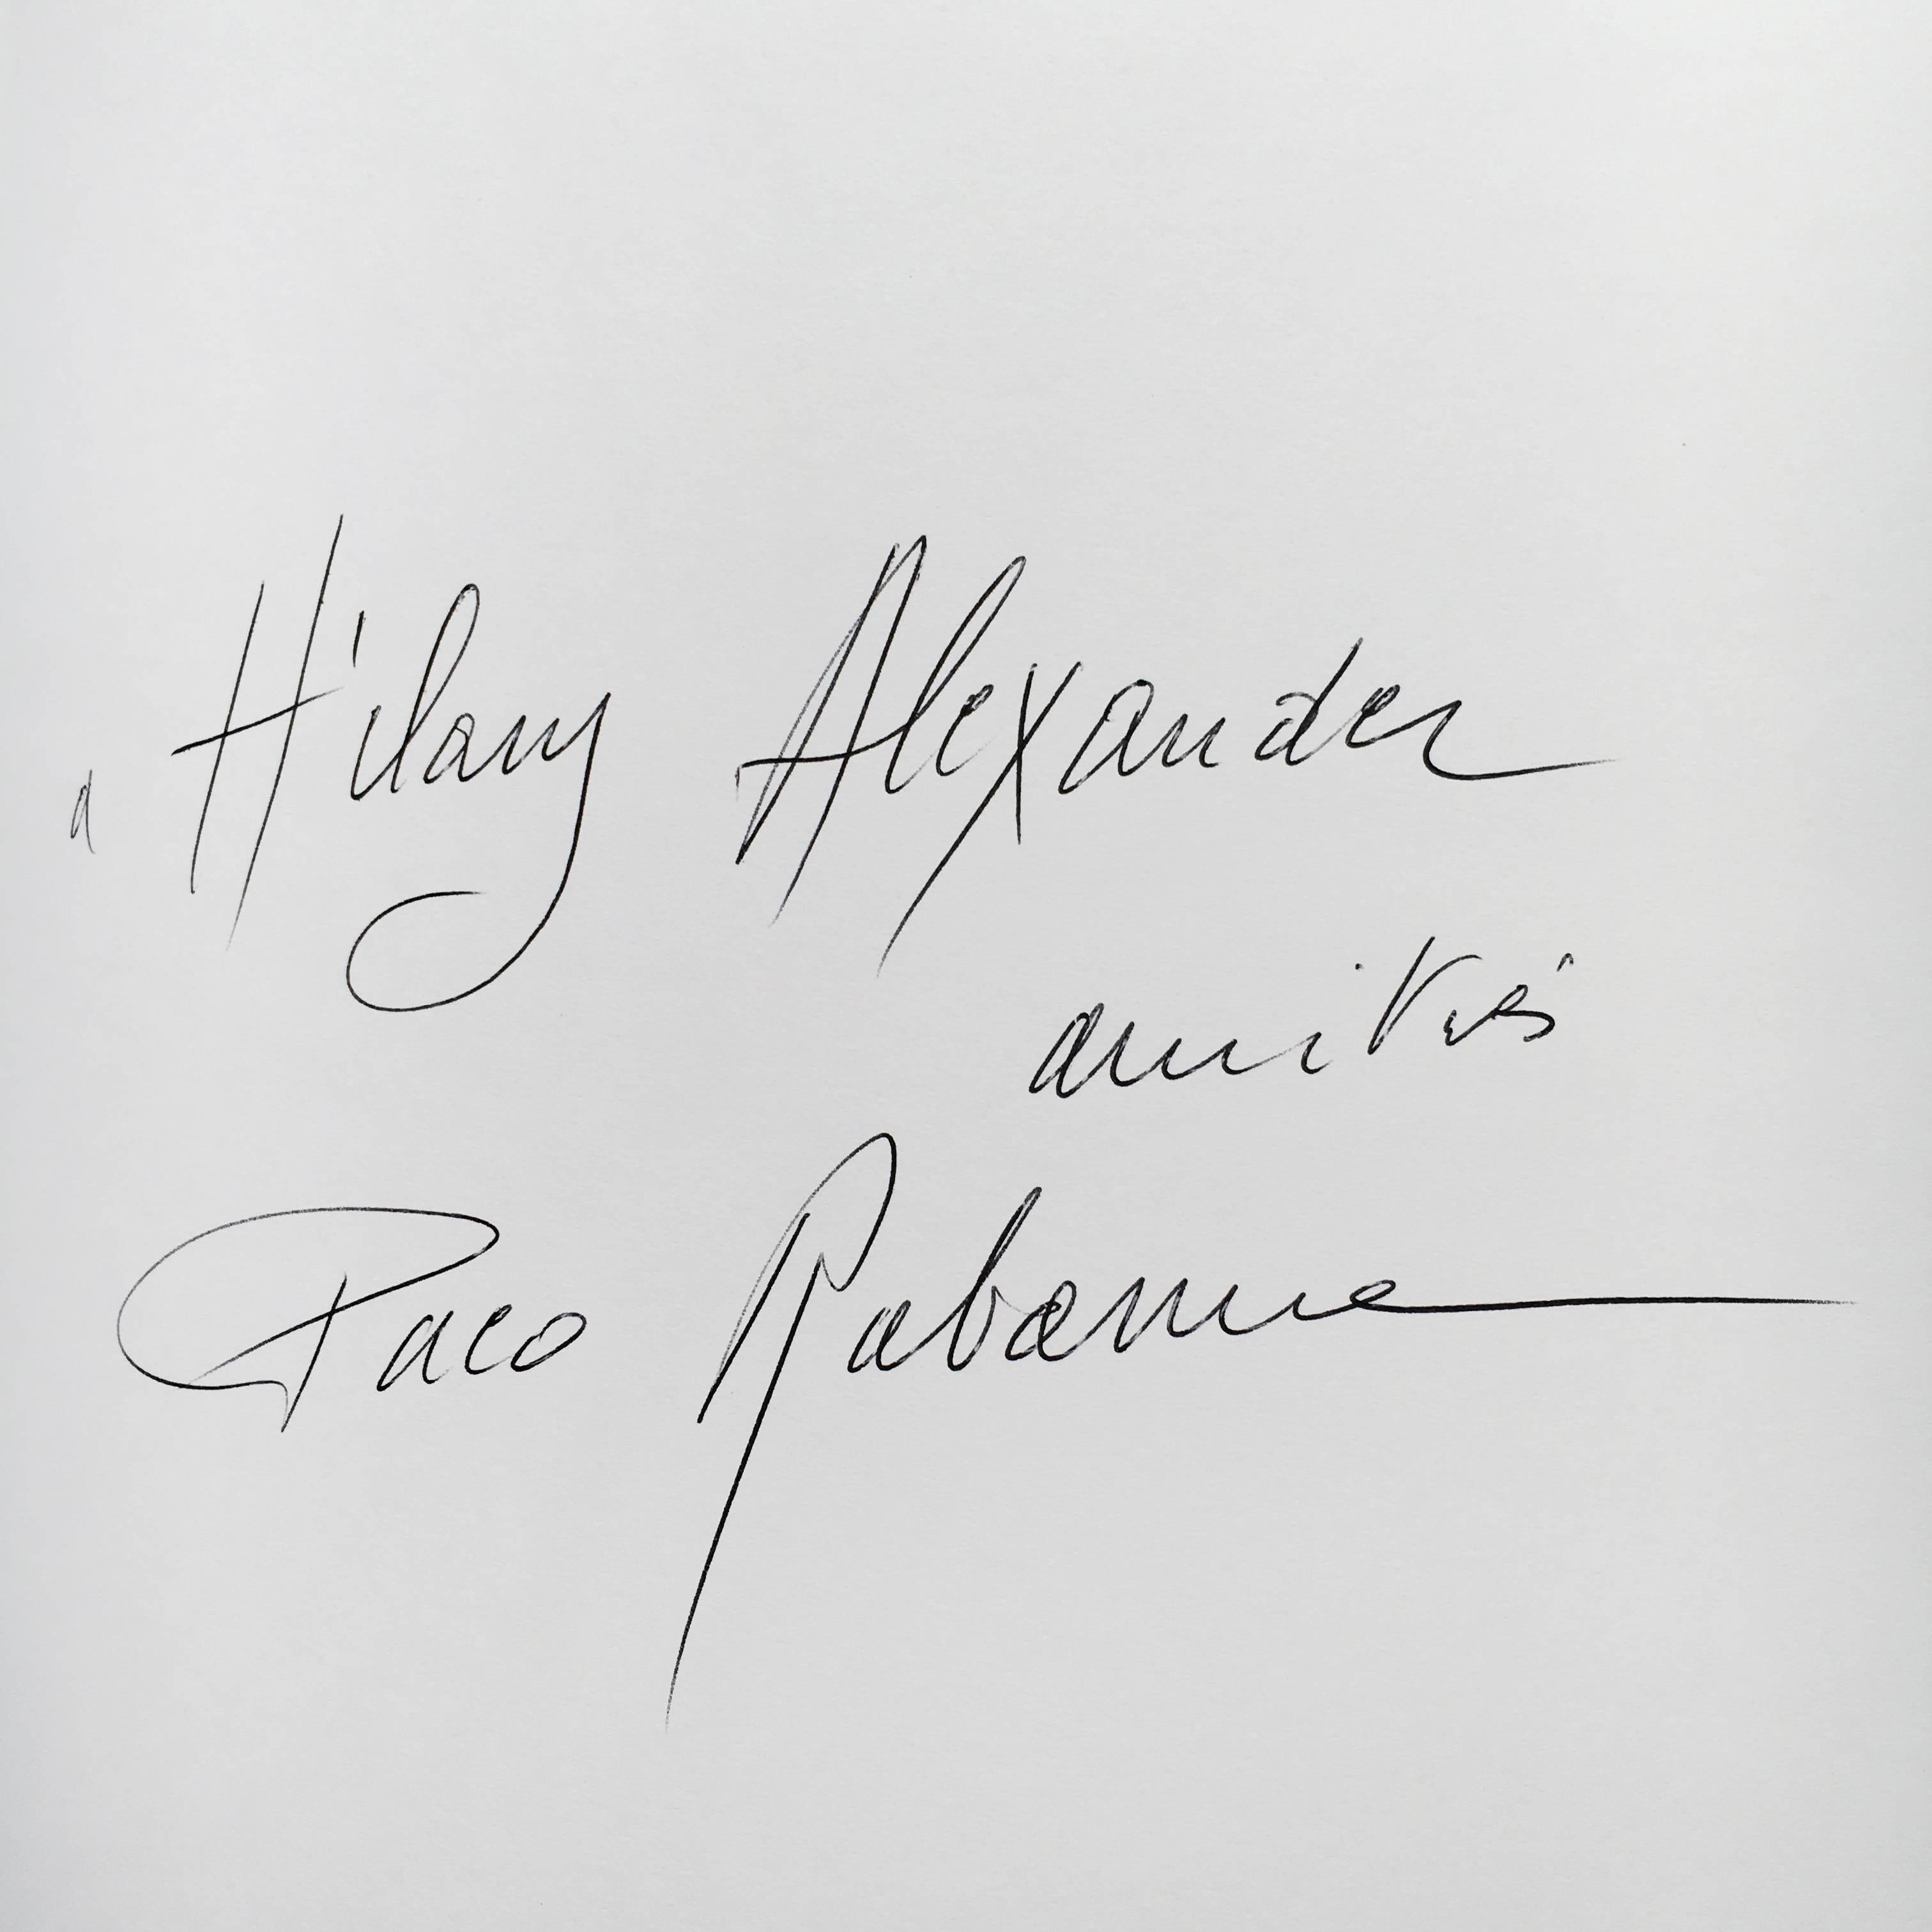 Signed first edition hard cover, published by Éditions Michel Lafon, 1996.

Signed from Paco Rabanne to fashion journalist Hilary Alexander.

Paco Rabanne, a feeling for research.

An impressive monograph covering the daring and experimental